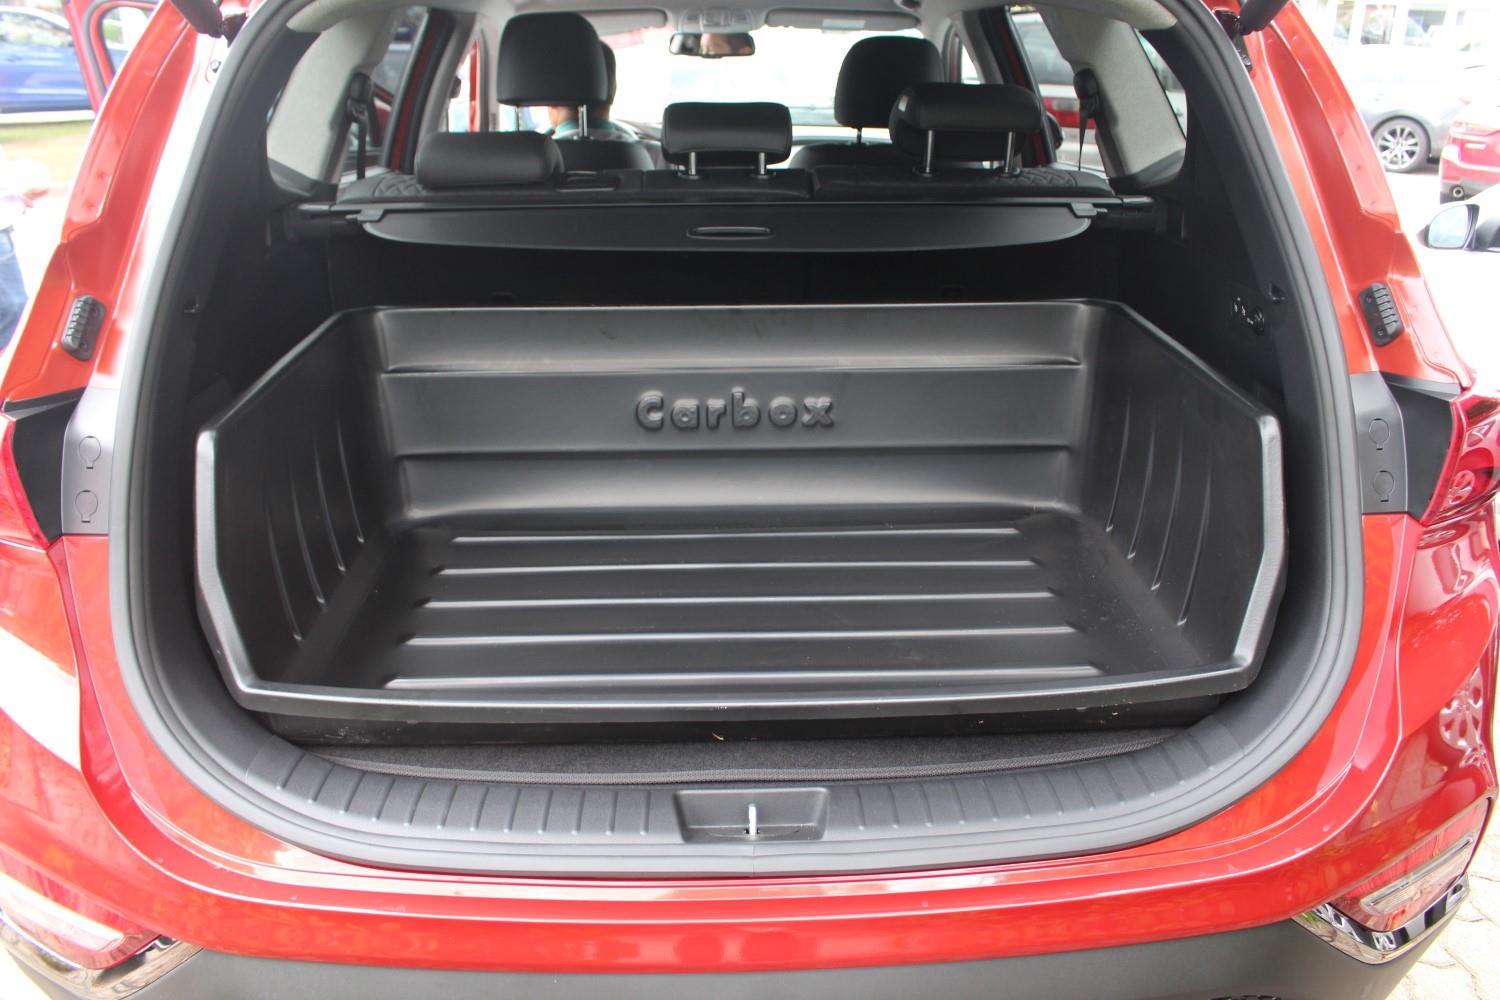 Boot liner suitable for Hyundai Santa Fe (TM) 2018-2024 Carbox Classic YourSize 113 x 90 high wall